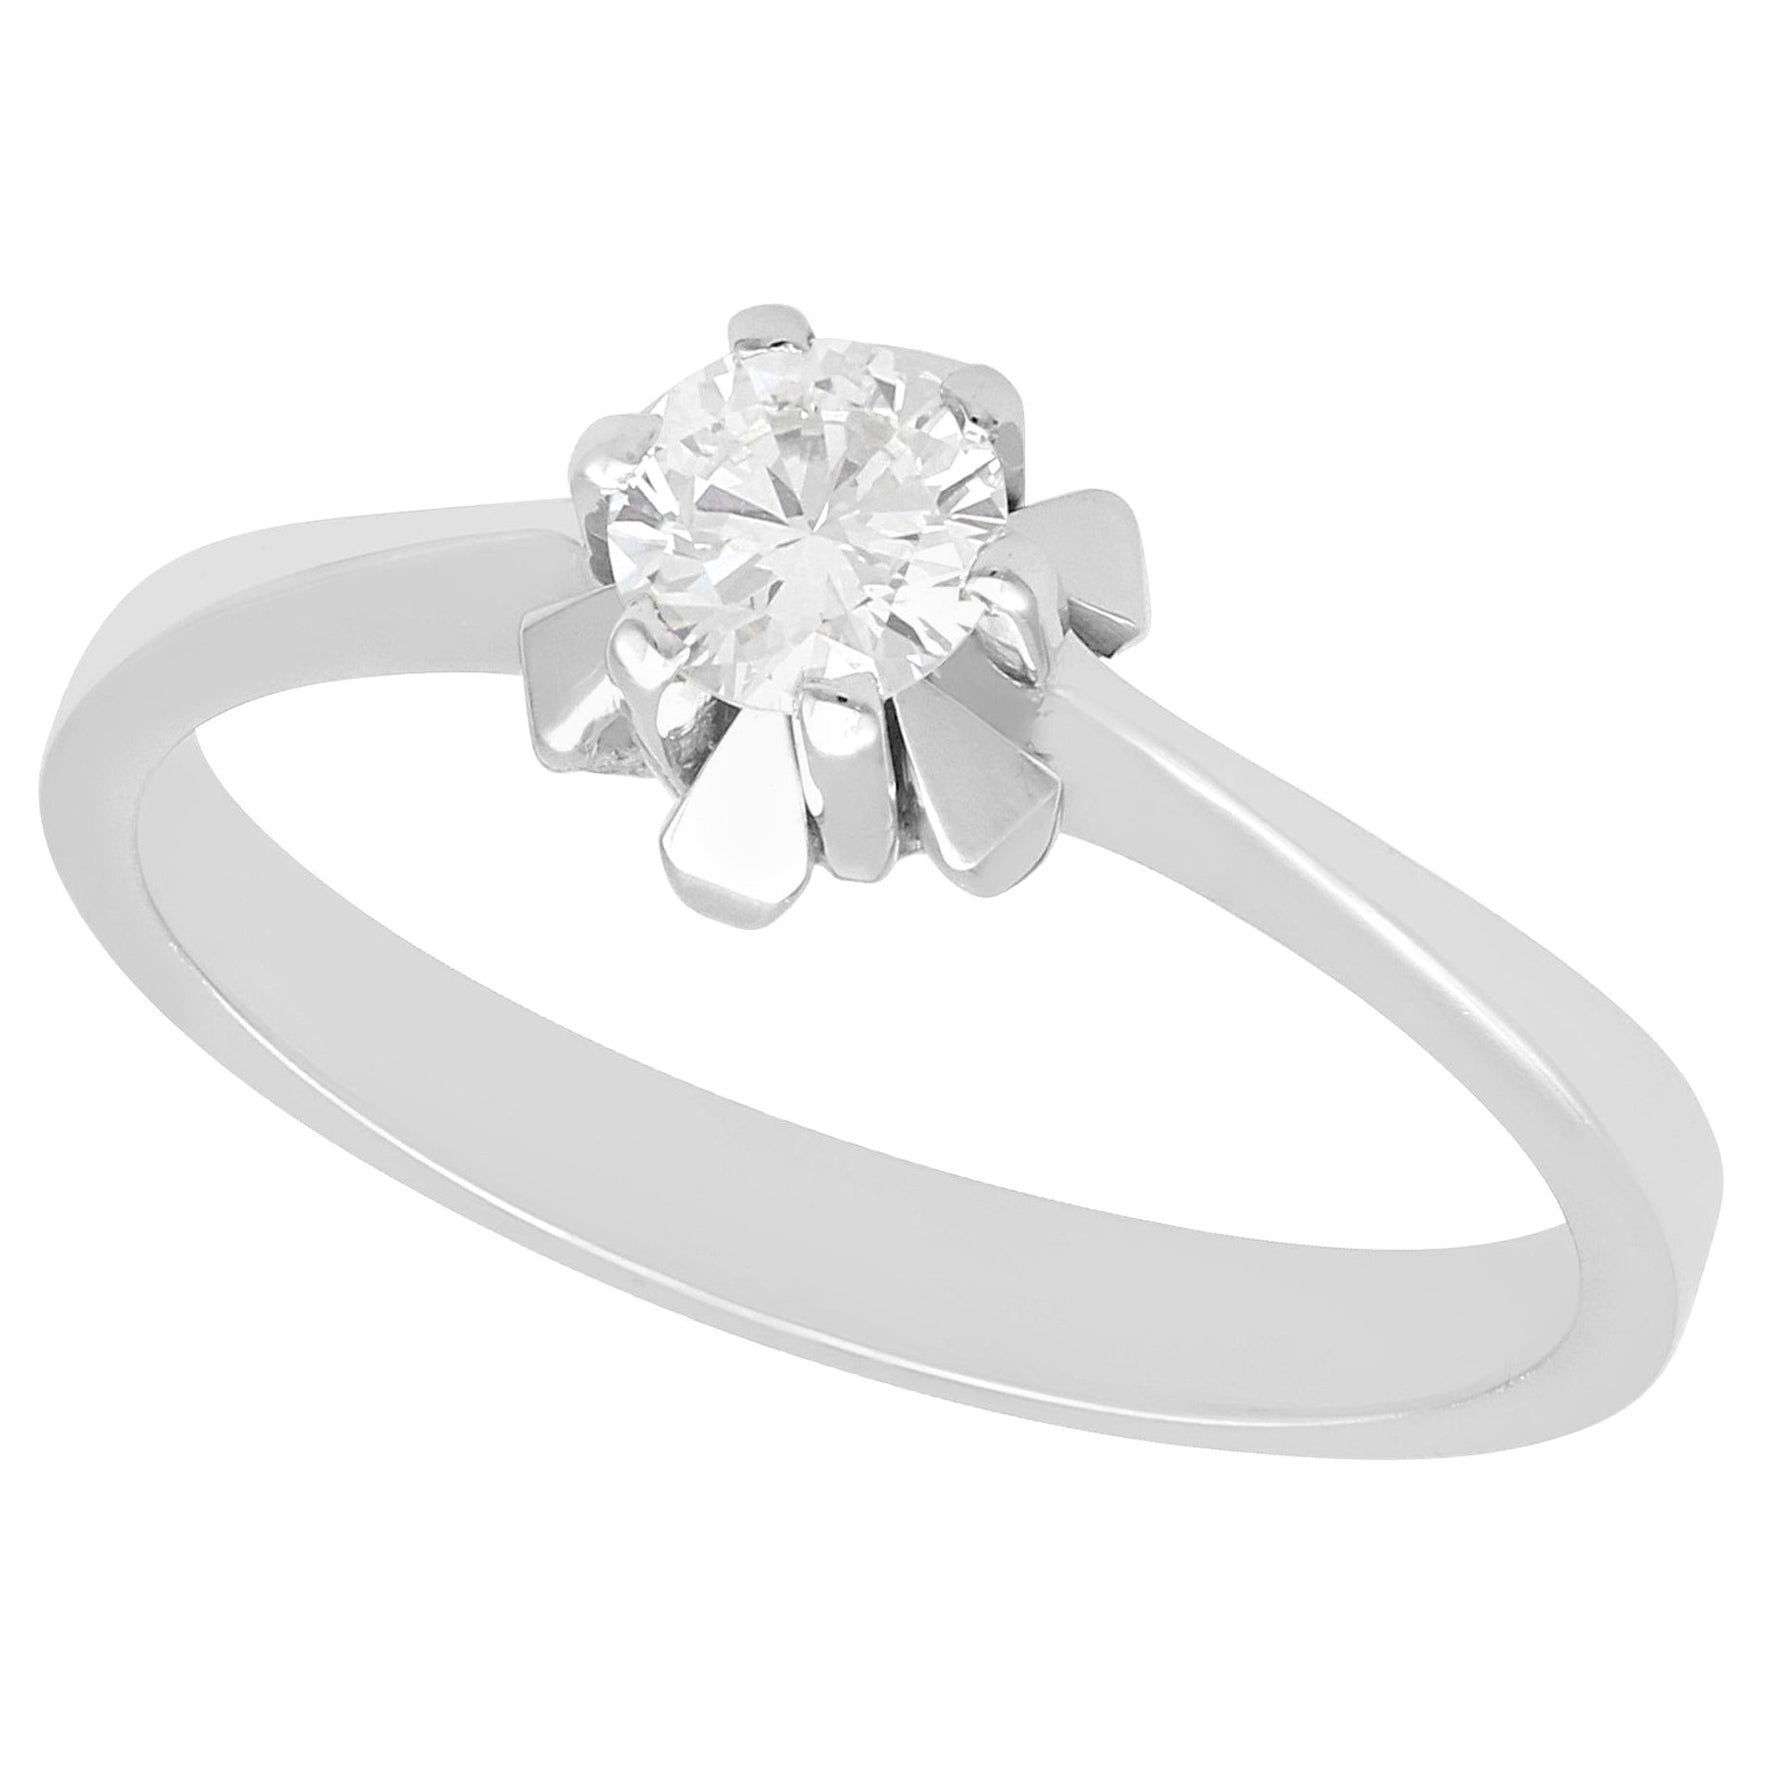 Vintage Diamond and White Gold Solitaire Ring